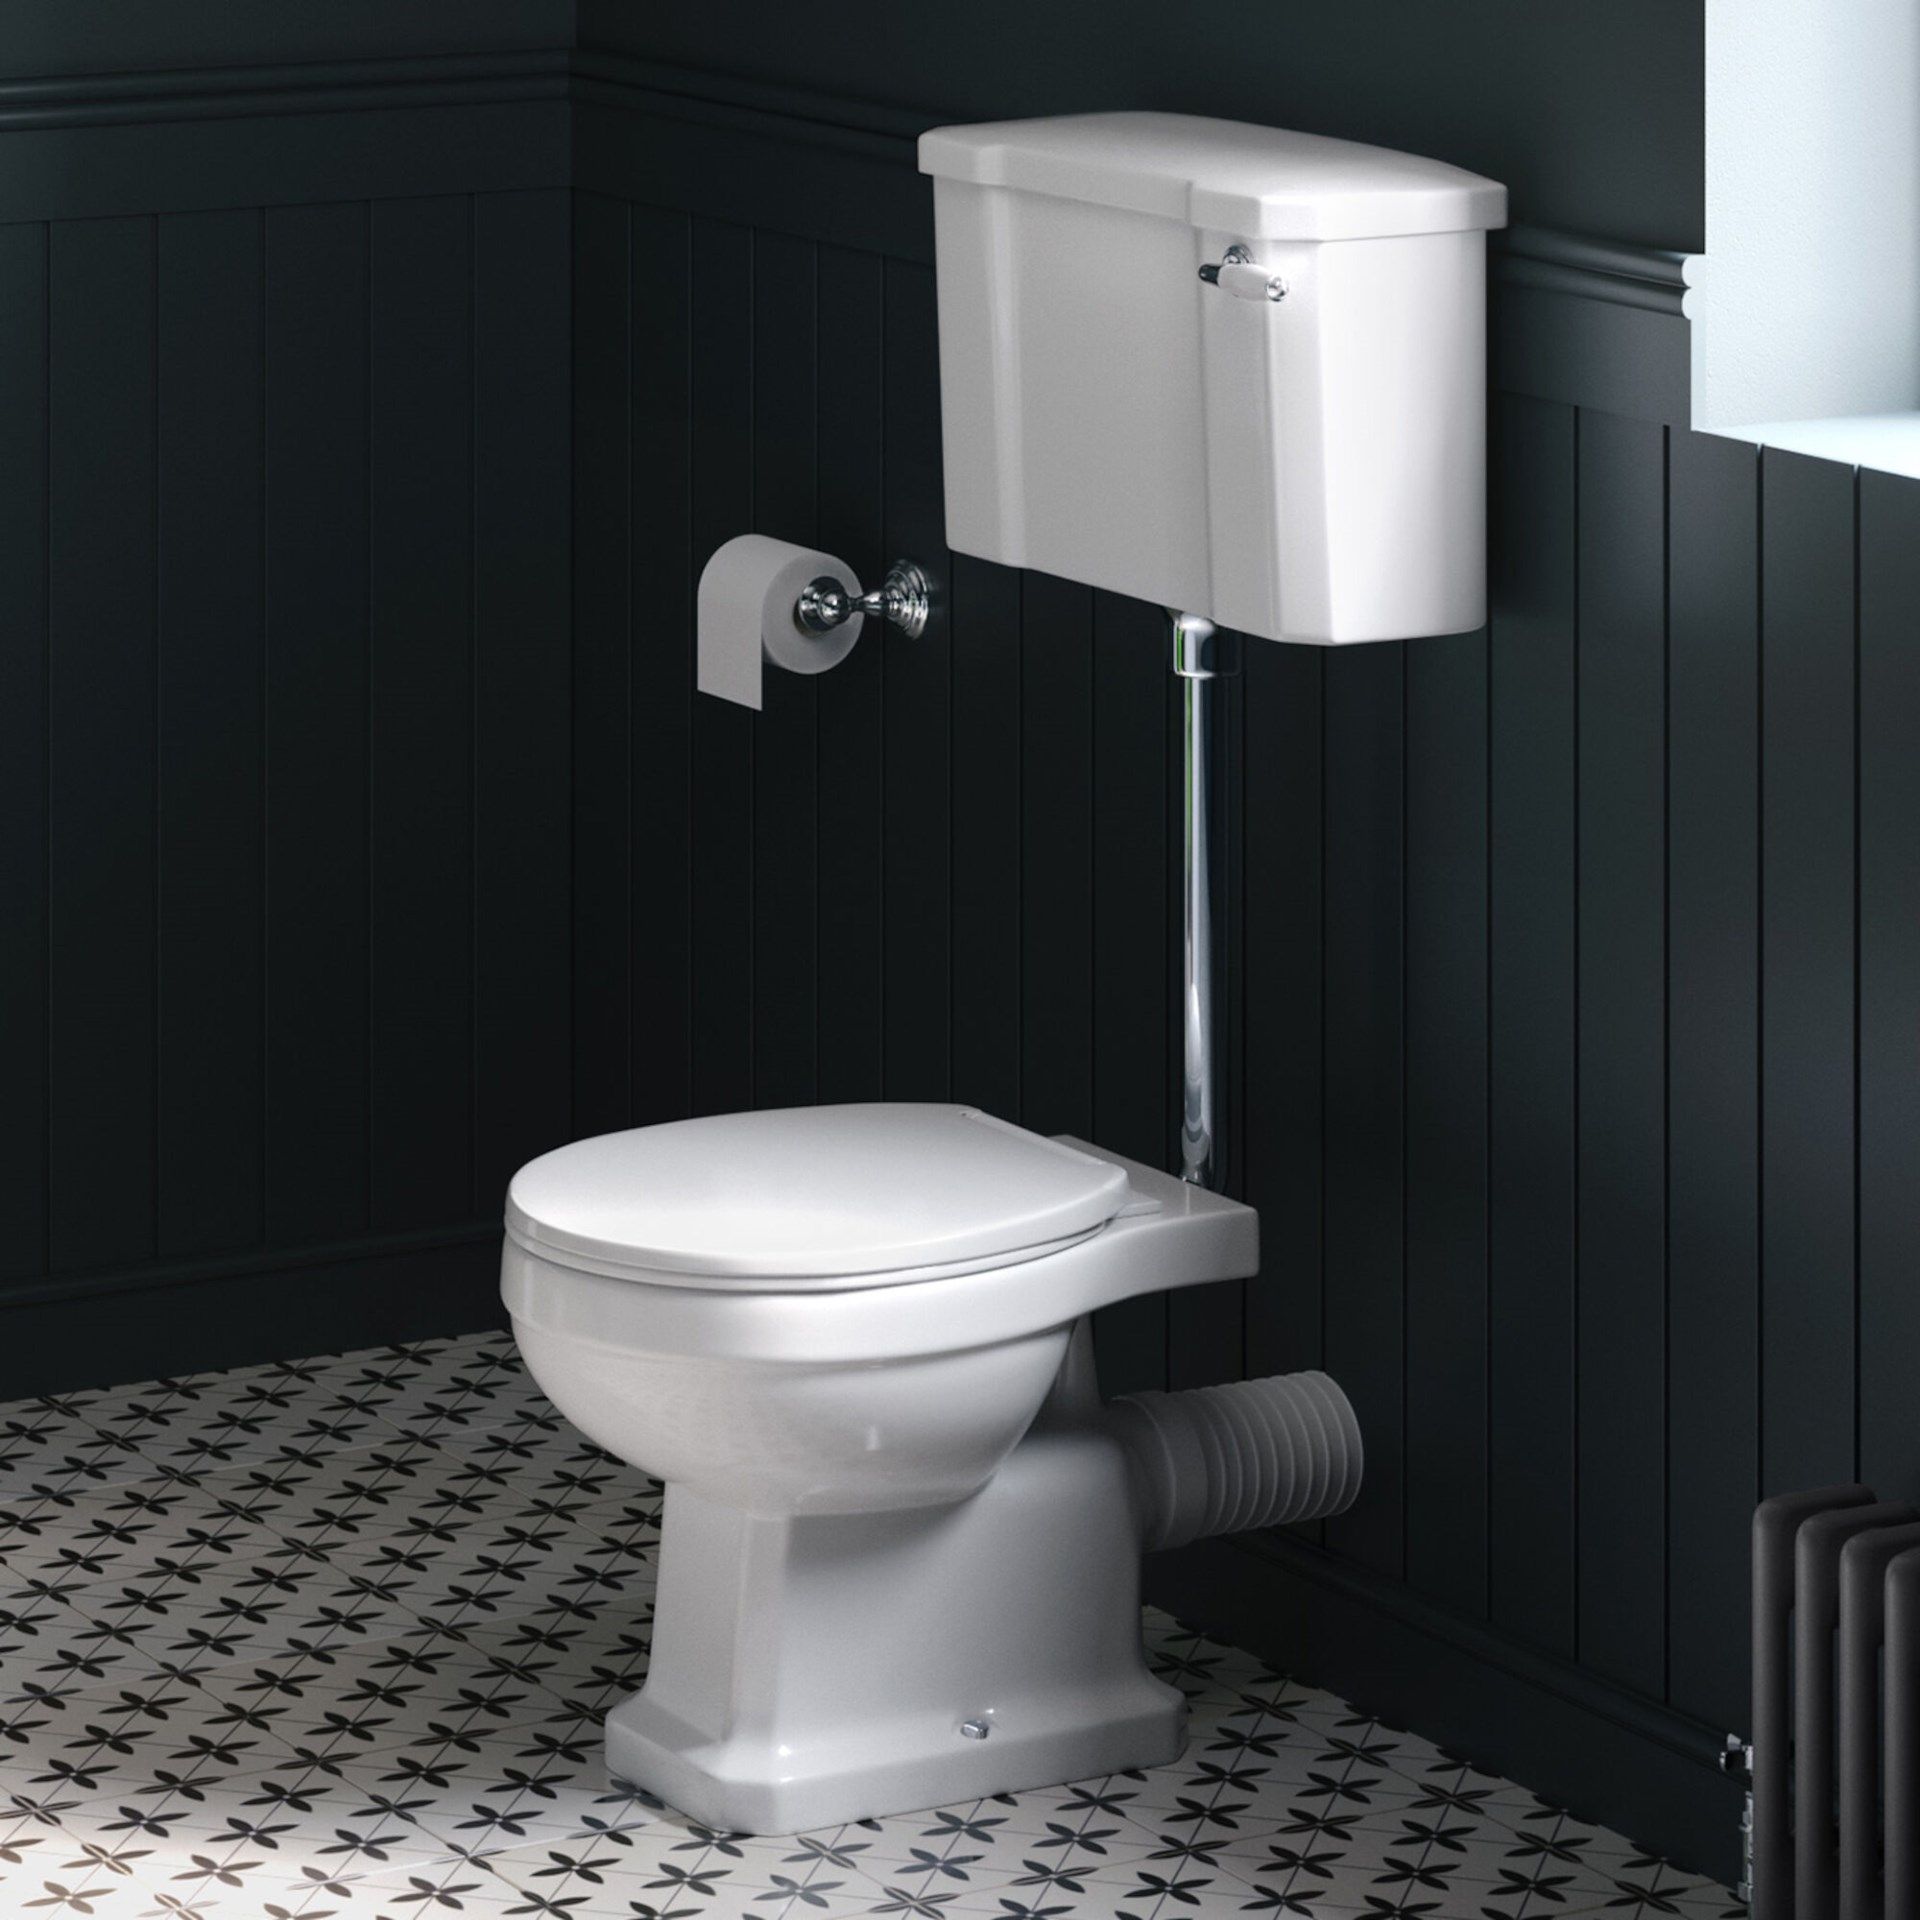 (AA13) ) Cambridge Traditional Toilet with Low-Level Cistern - White Seat. RRP £499.99.The tr...